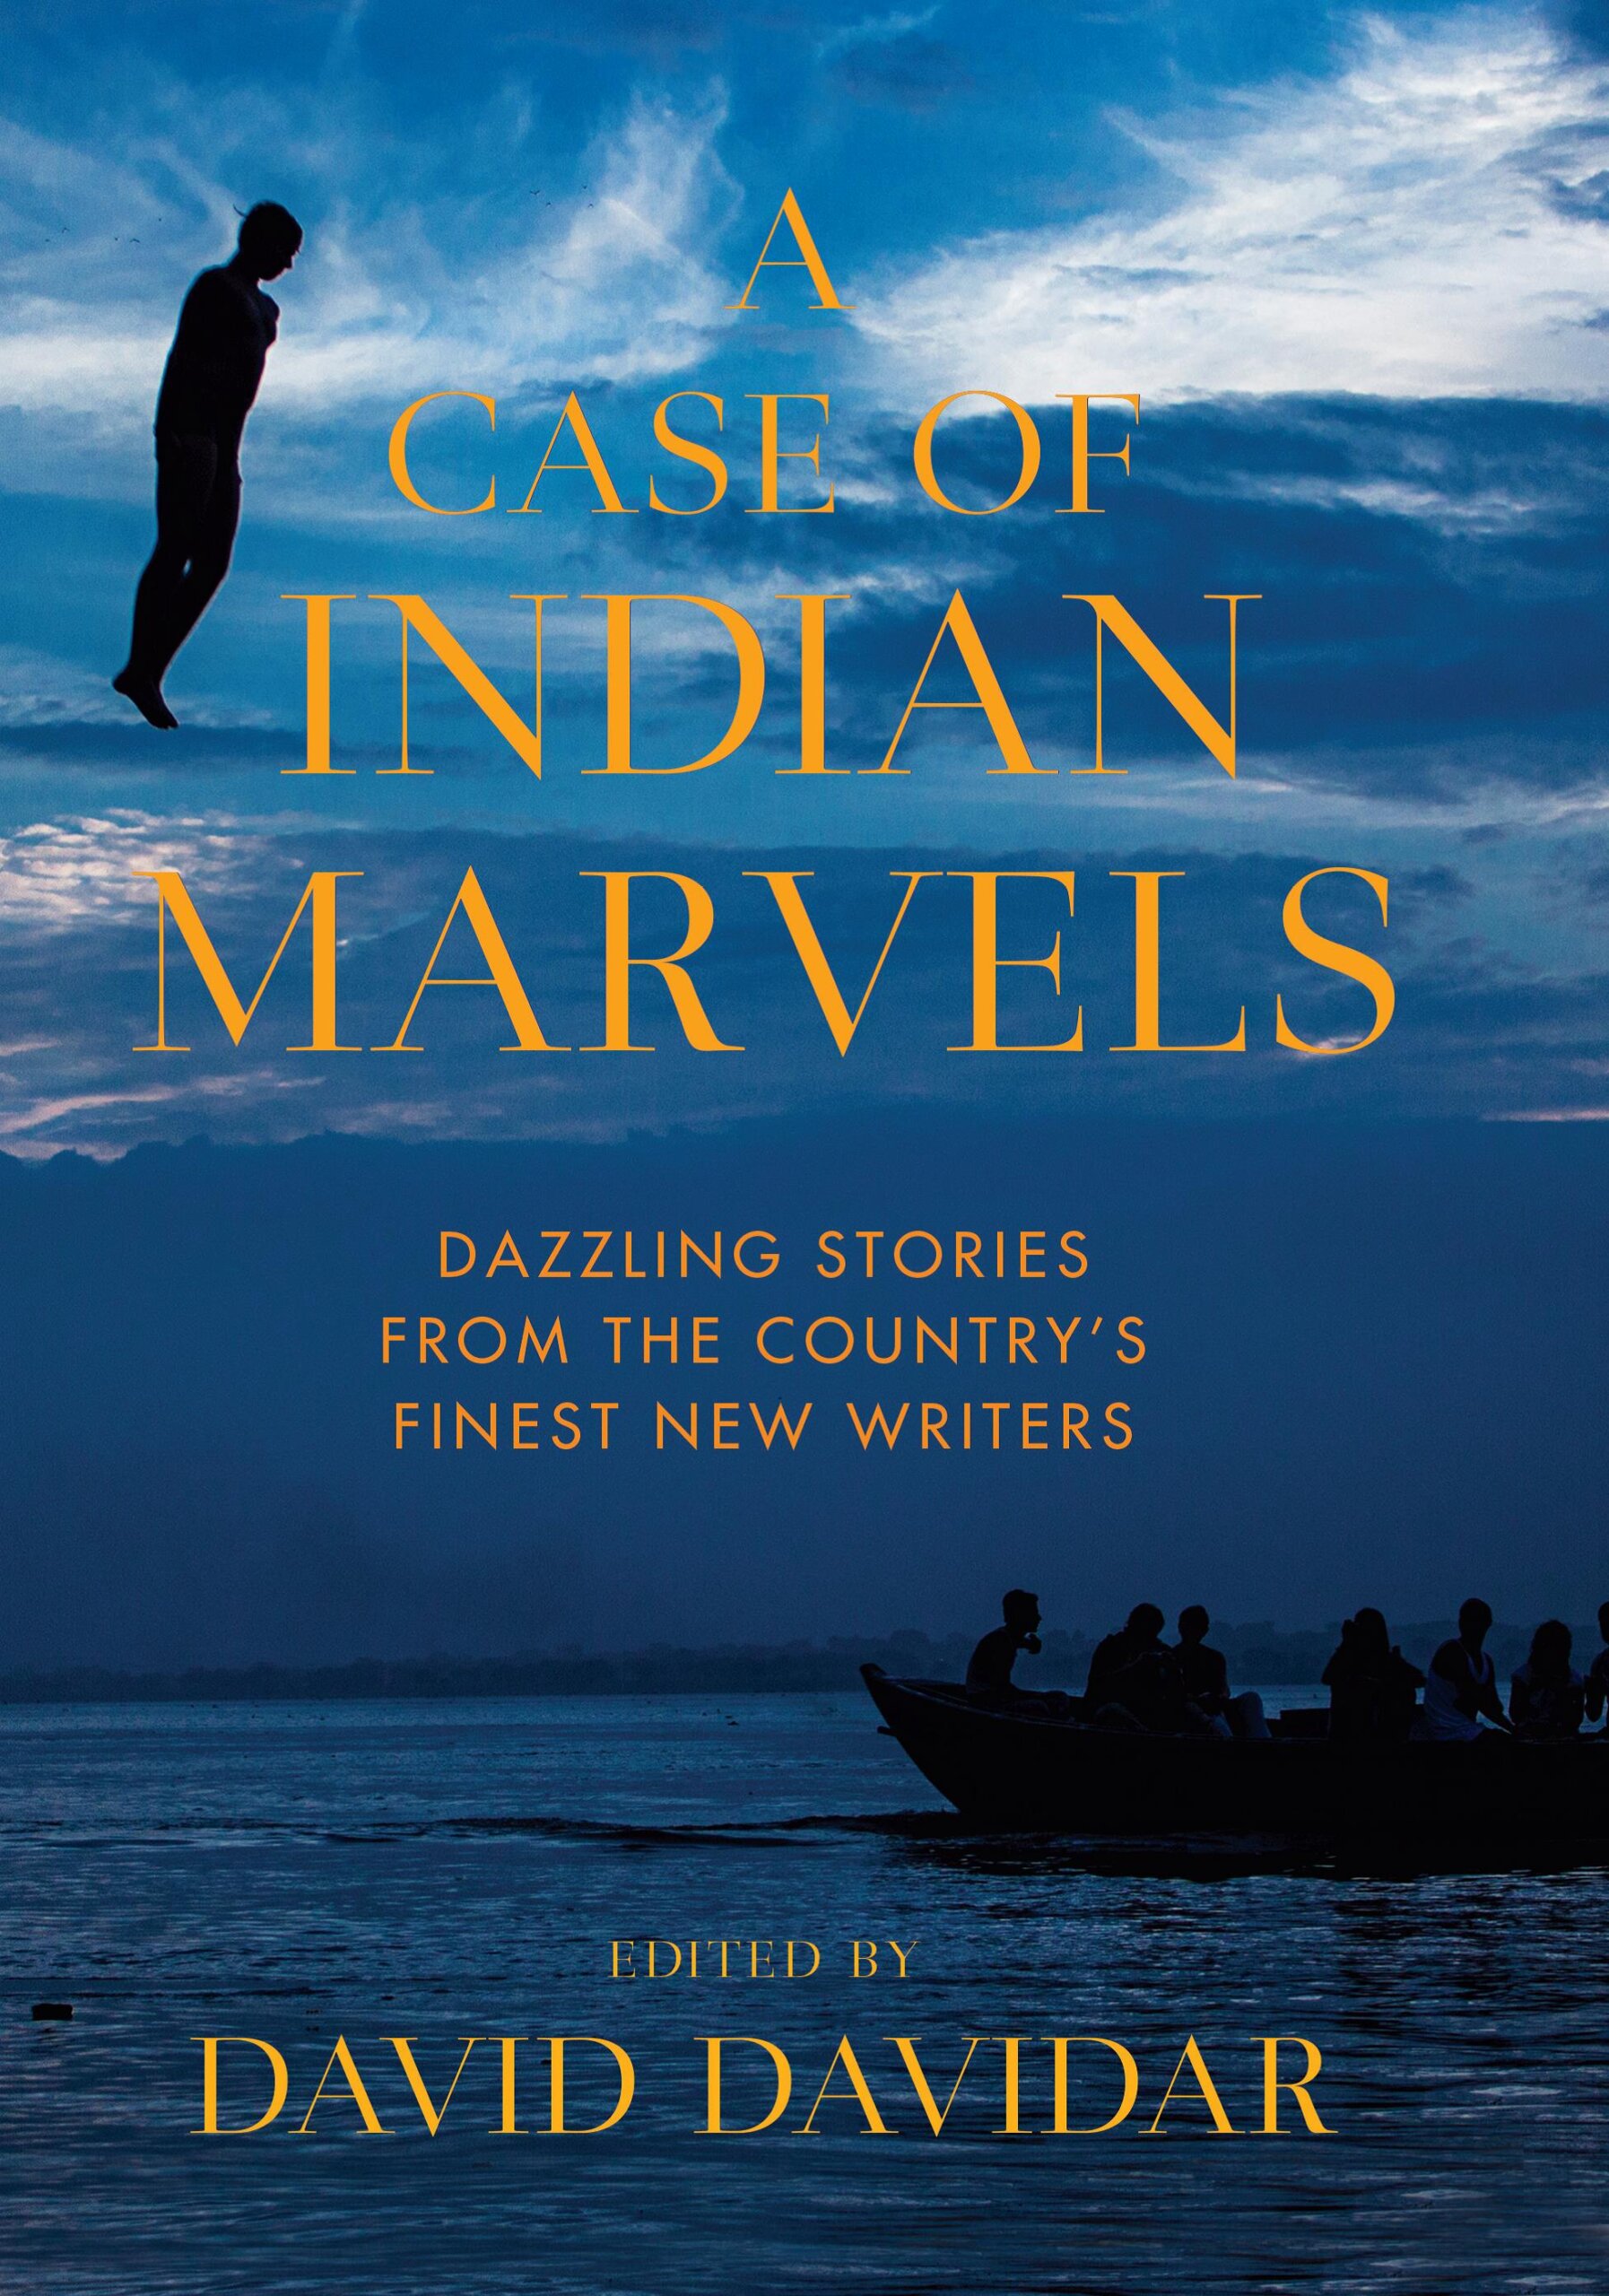 A Case of Indian Marvels: Dazzling Stories from the Country’s Finest New Writers